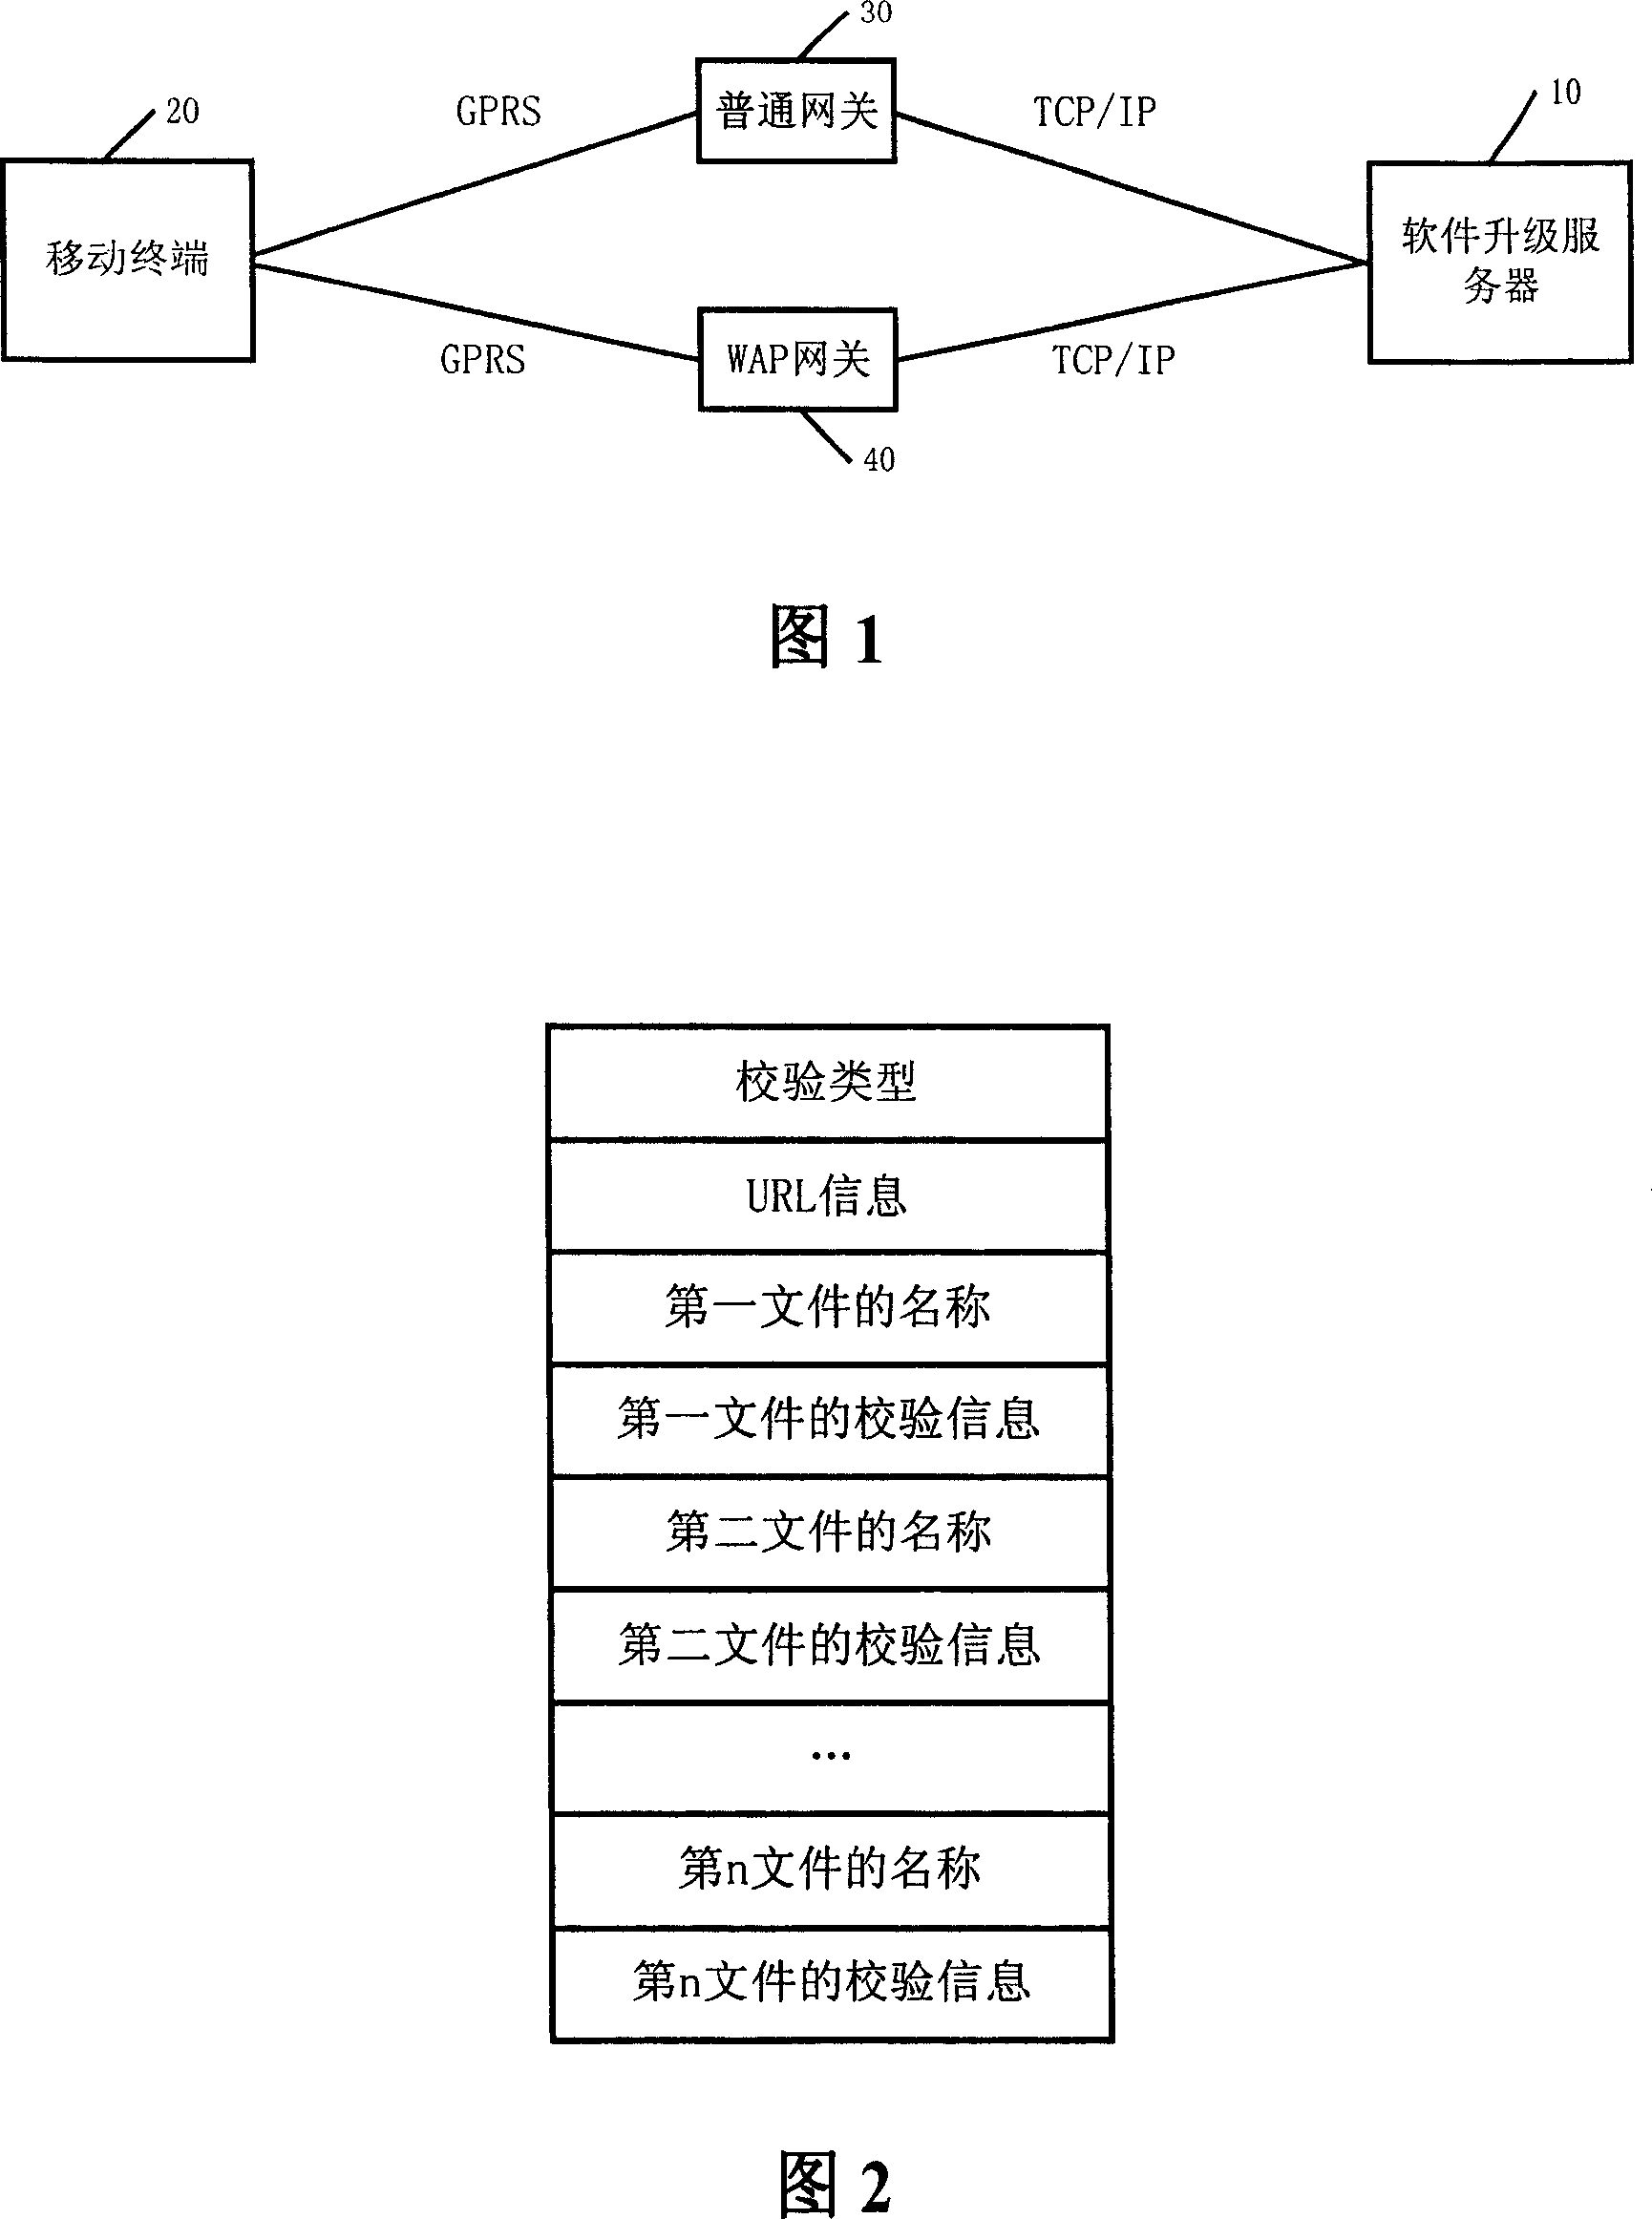 Method and apparatus used for upgrading software